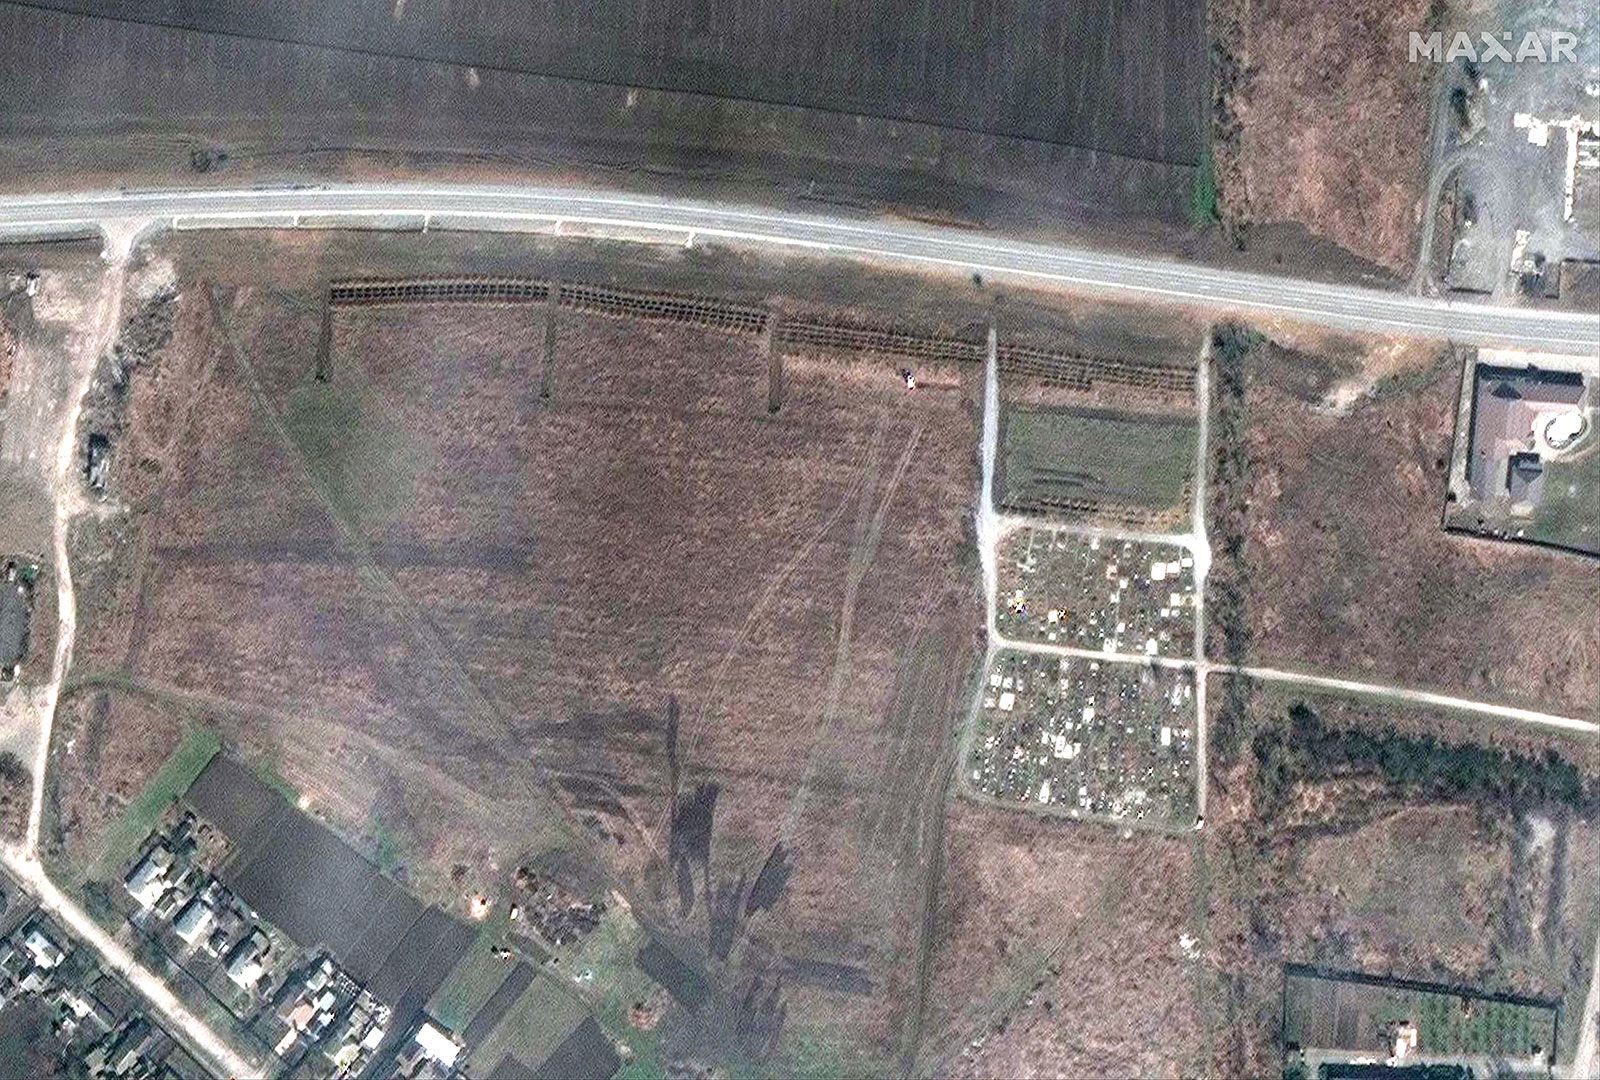 Satellite images point to evidence of mass graves outside of Mariupol - en